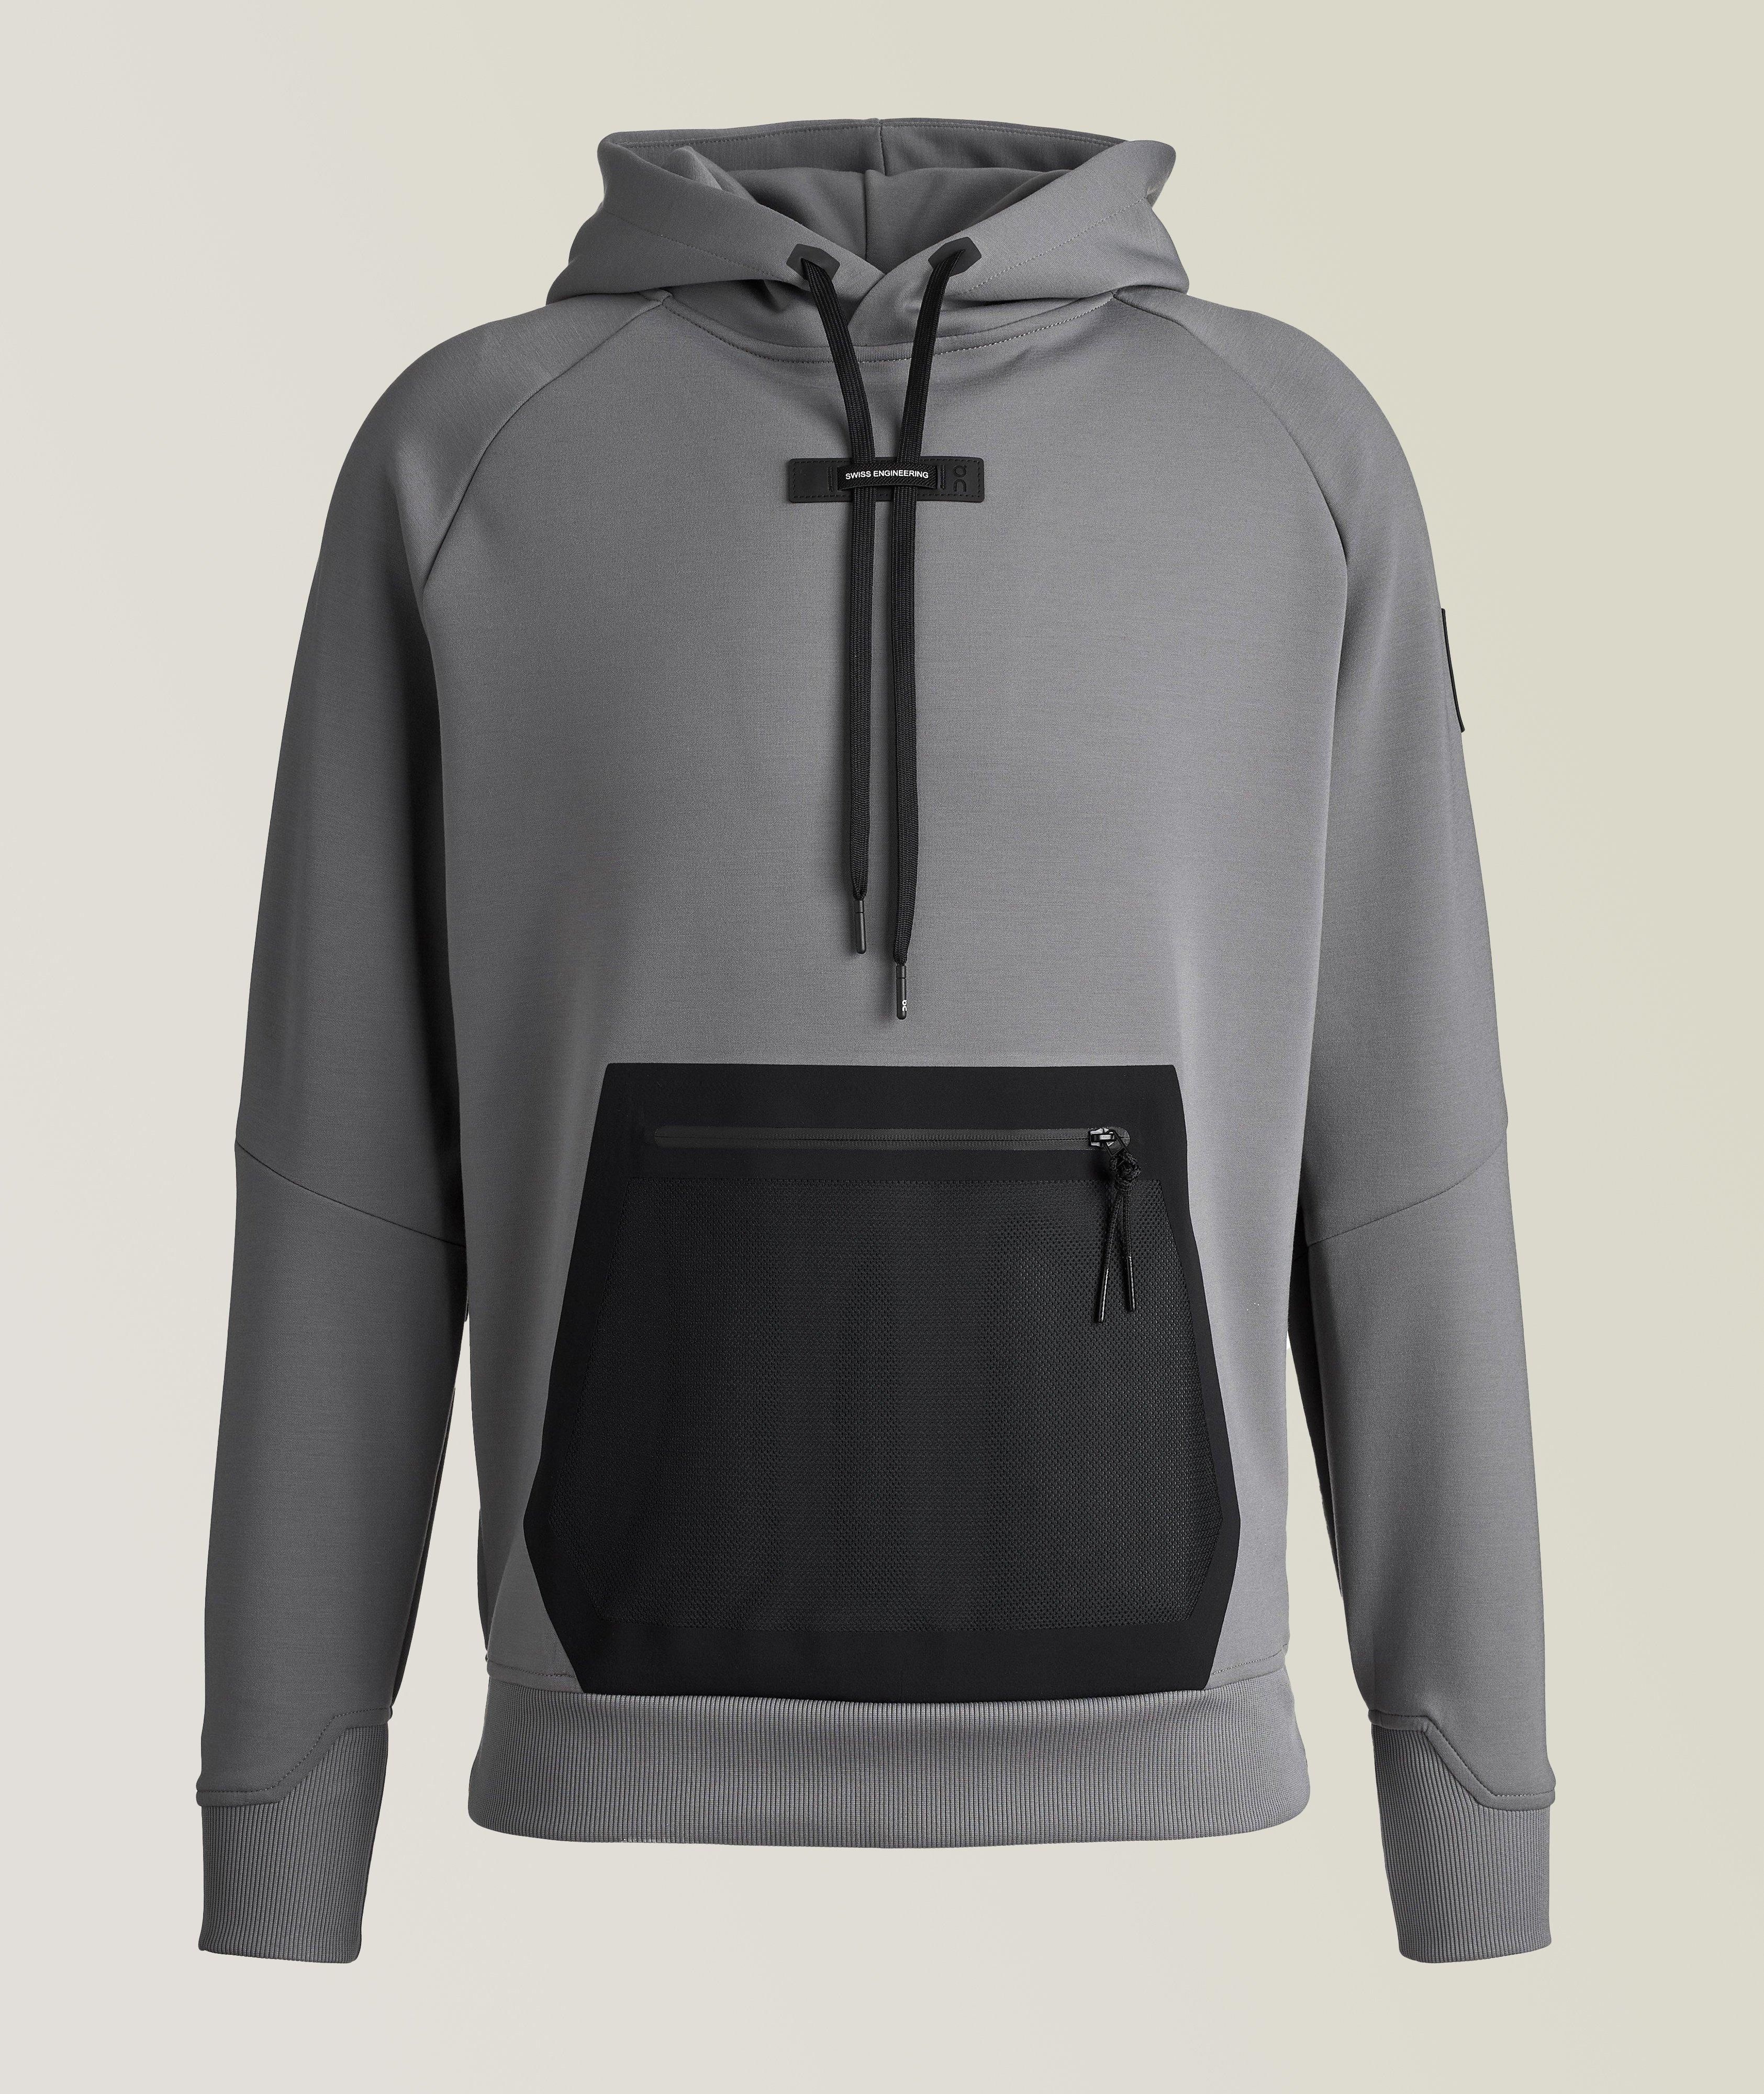 Performance Technical Hooded Sweater image 0